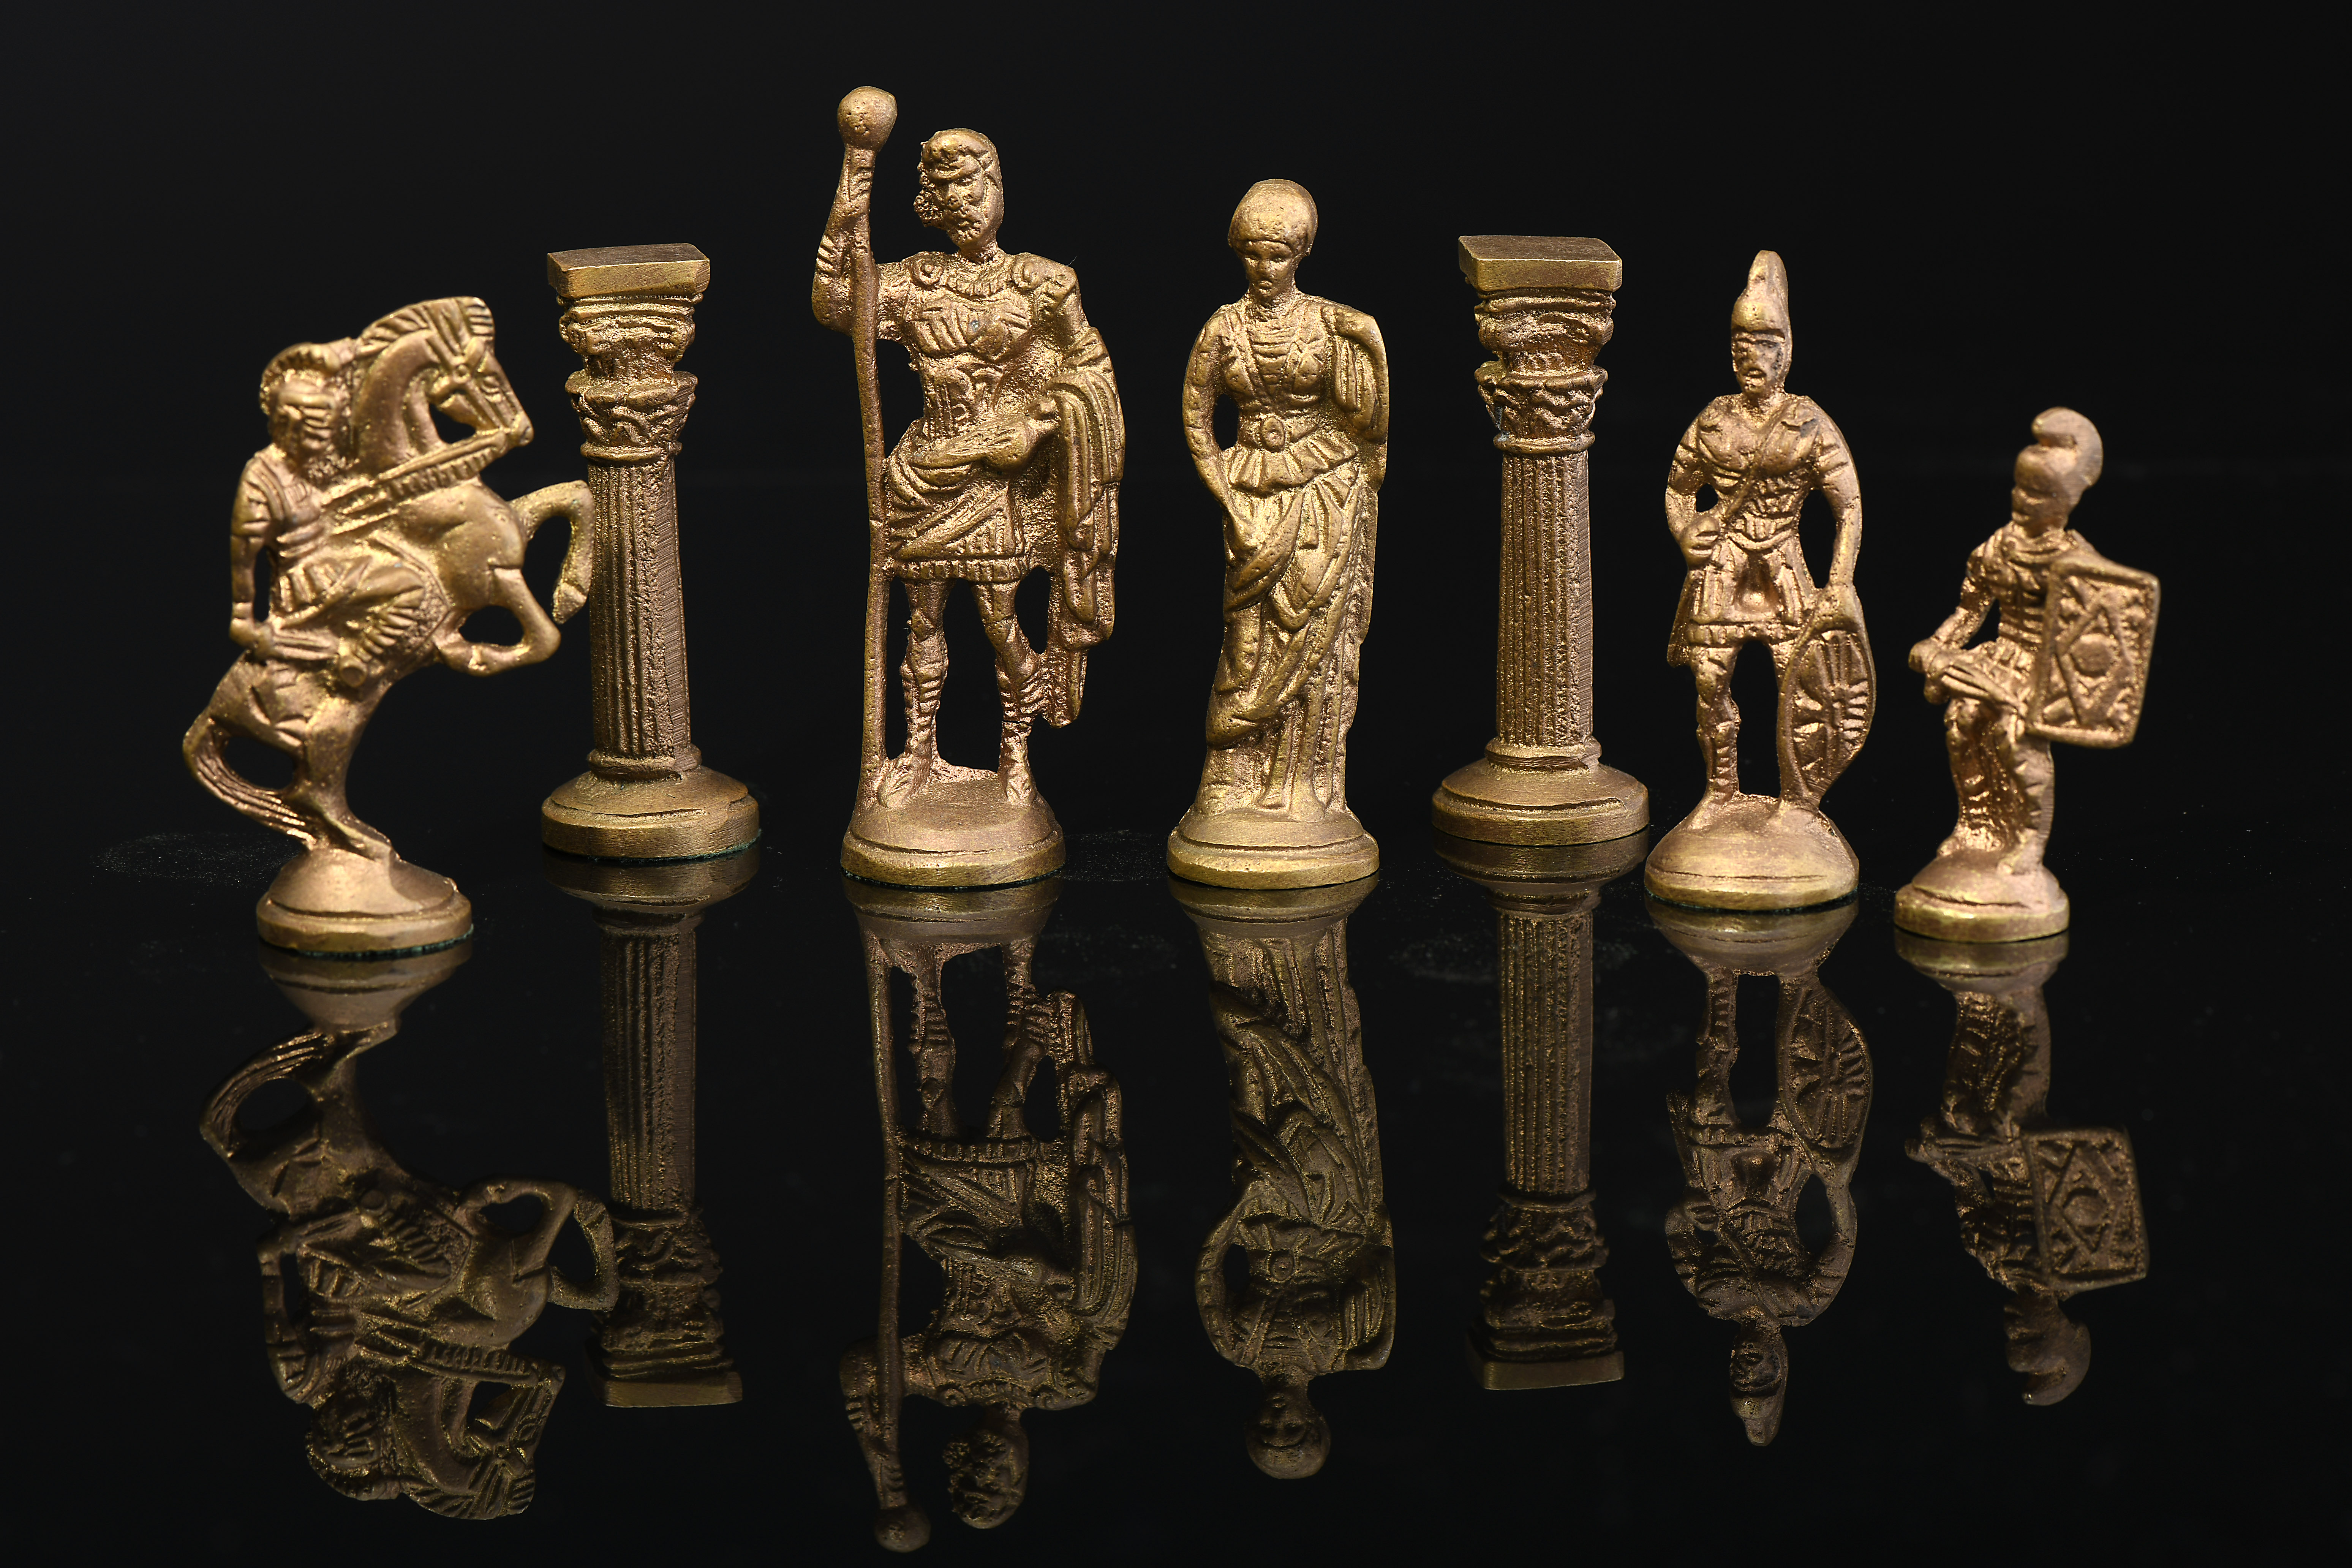 Chess pieces "Roman Armies" and chessboard closing in a box shape - Image 3 of 4